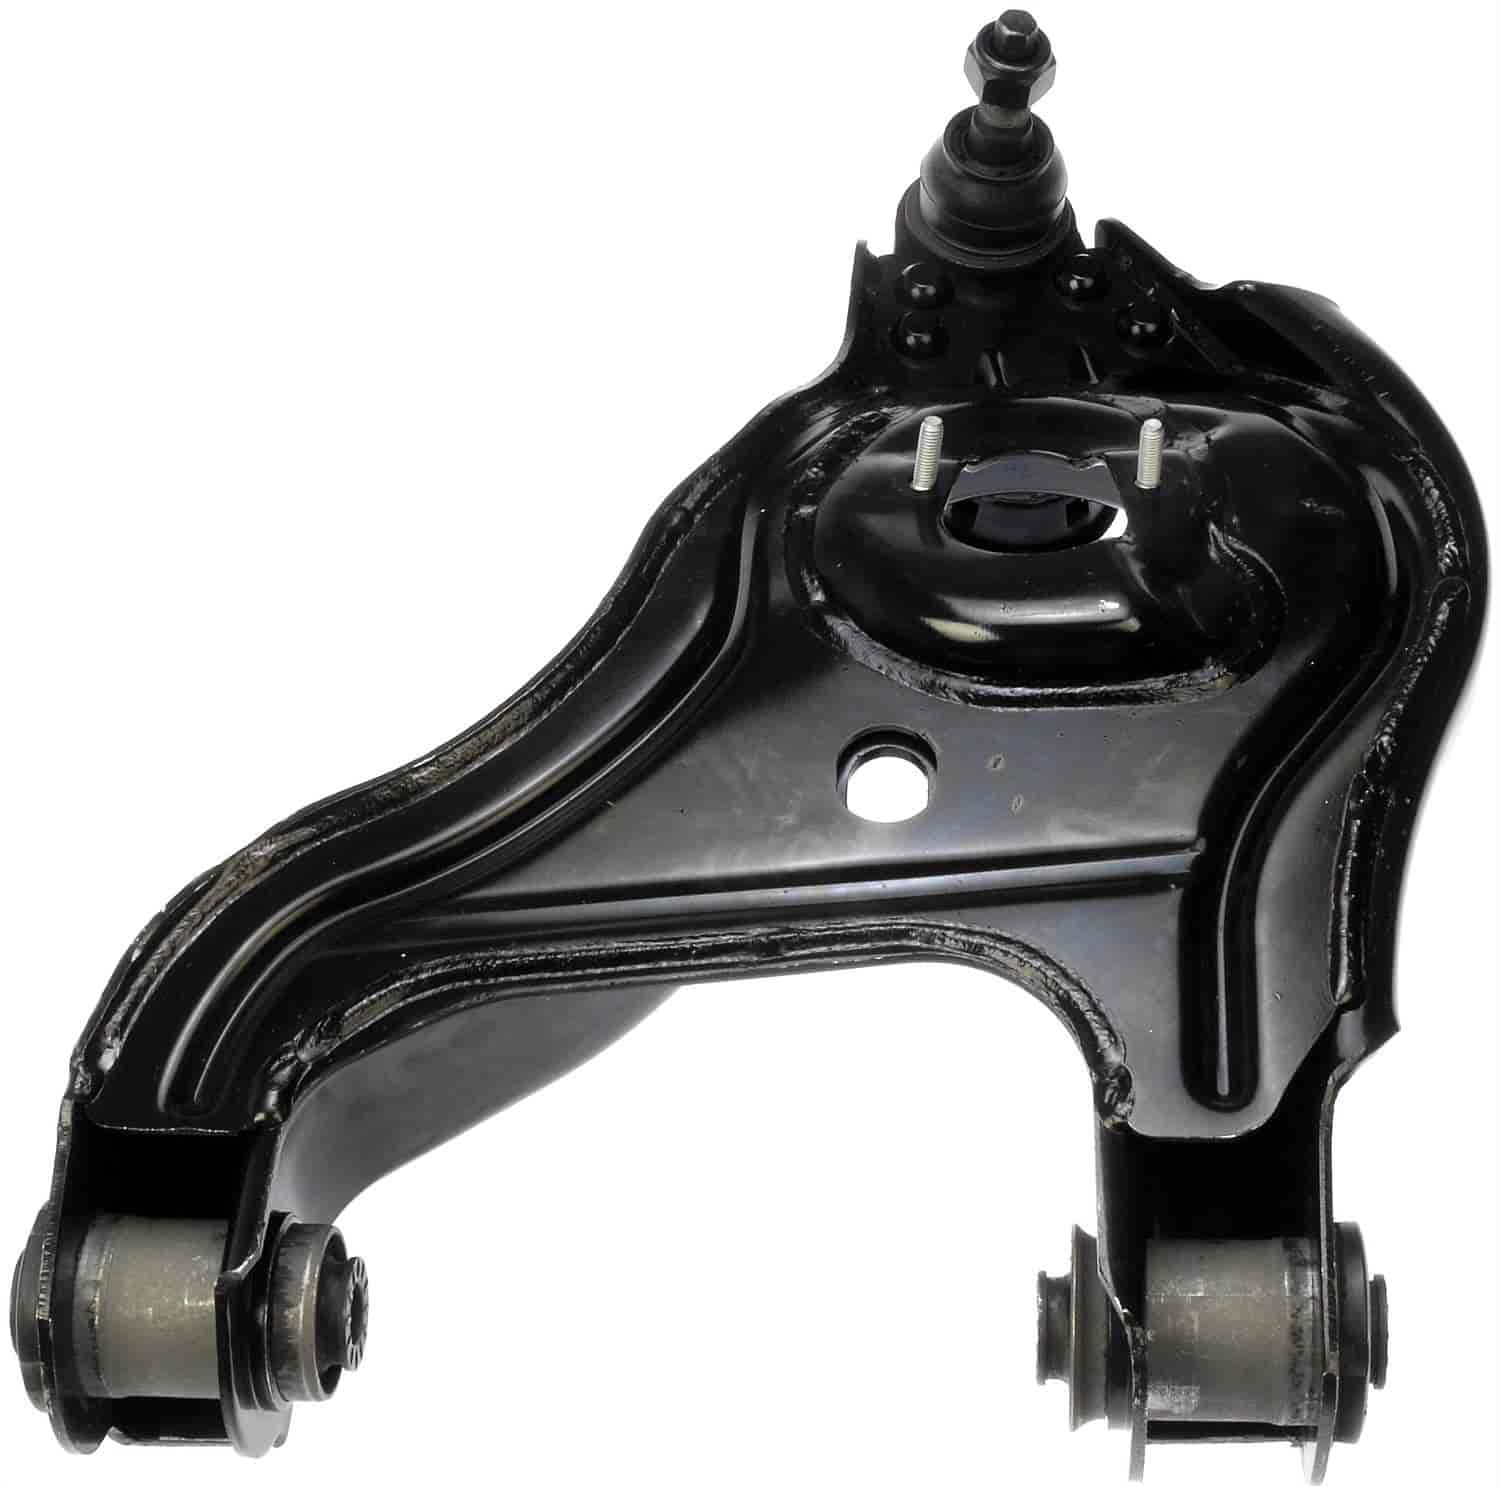 Lower Control Arm 2003-2010 Dodge Ram 2500/3500, 2011-2013 Ram 2500/3500 - Front Right